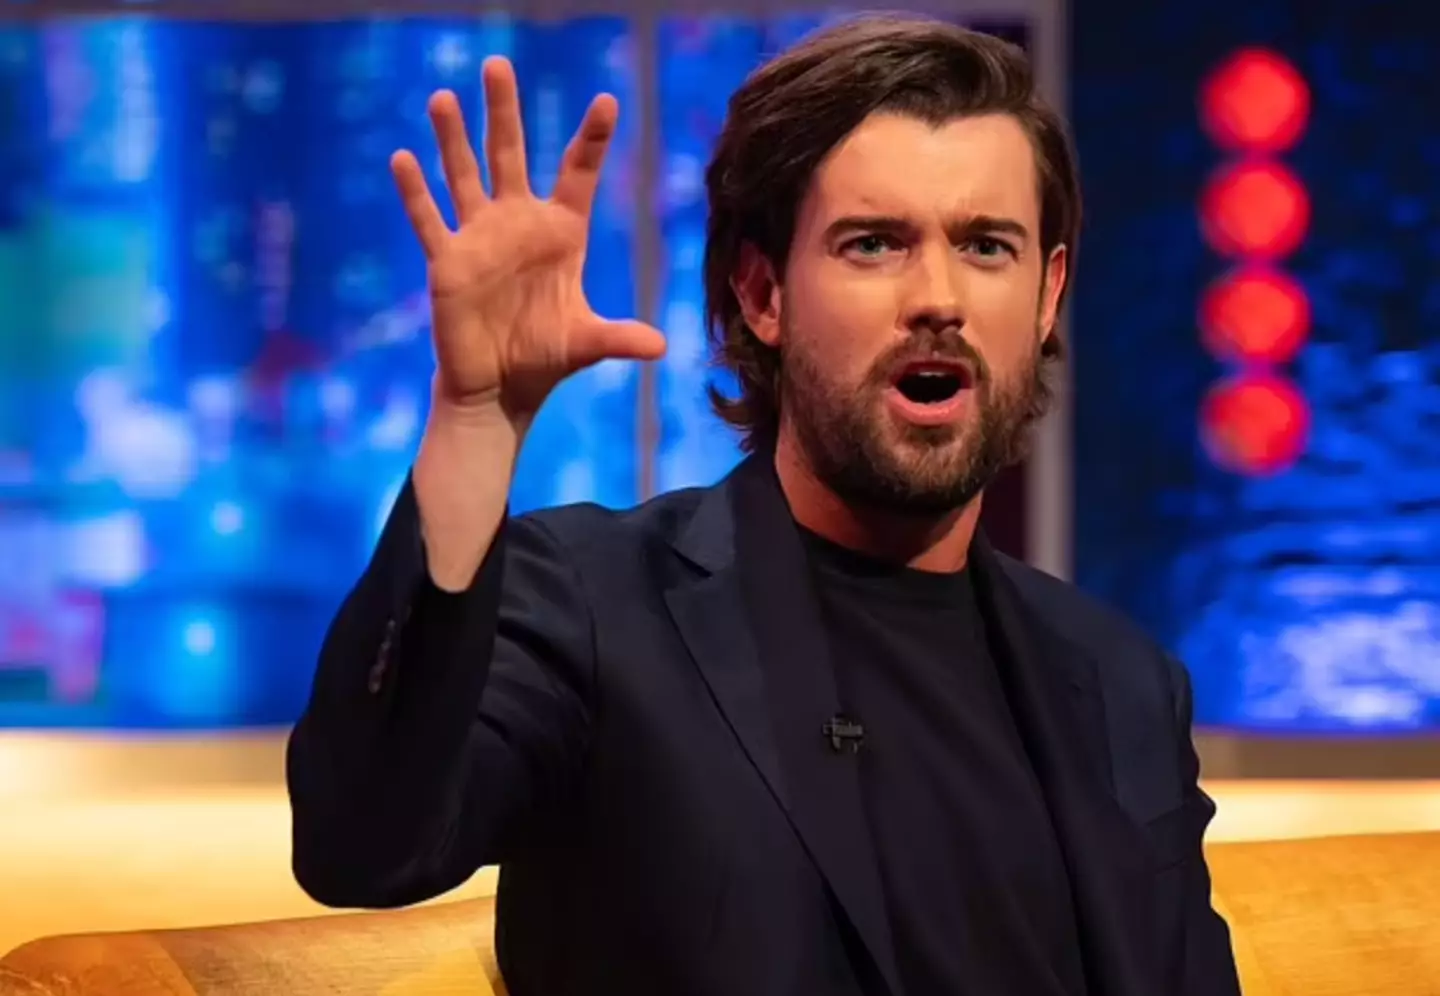 Jack Whitehall appeared on The Jonathan Ross Show.